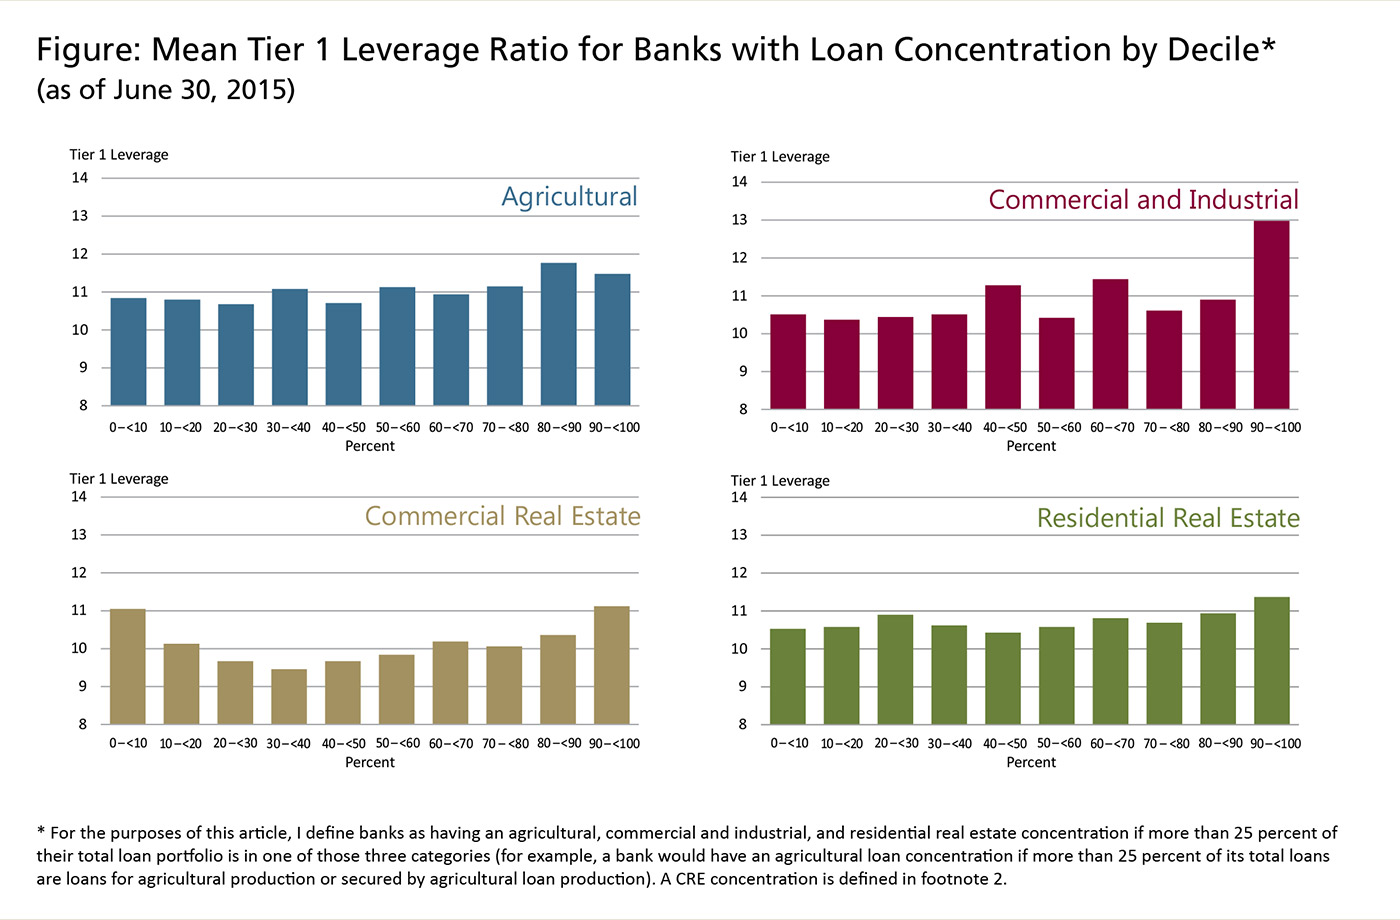 Figure 1: Mean Tier 1 Leverage Ratio for Banks with Loan Concentration